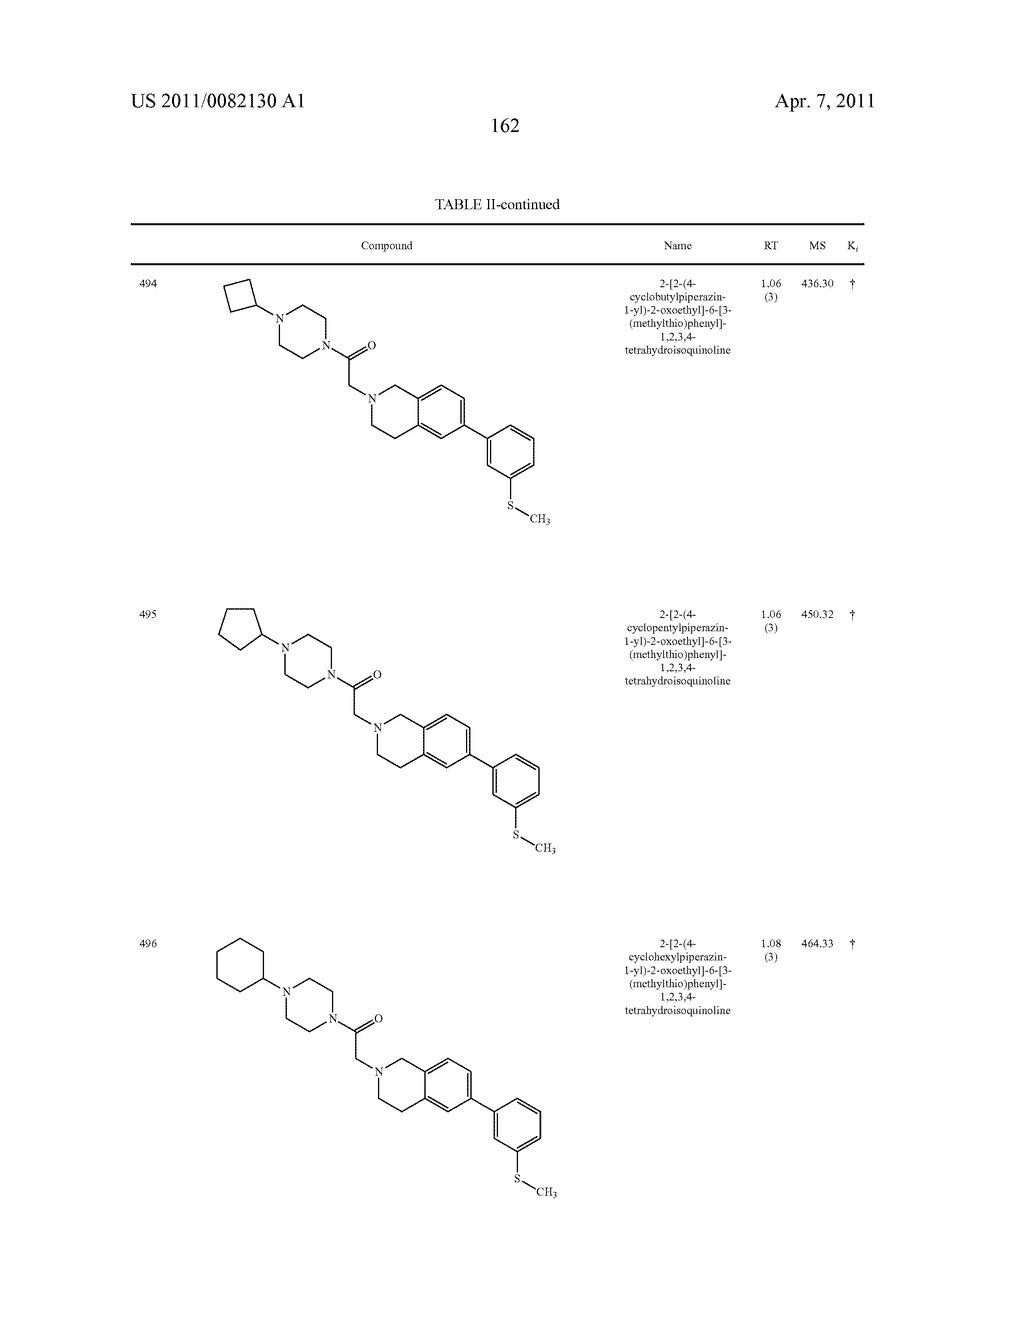 PIPERAZINYL OXOALKYL TETRAHYDROISOQUINOLINES AND RELATED ANALOGUES - diagram, schematic, and image 163